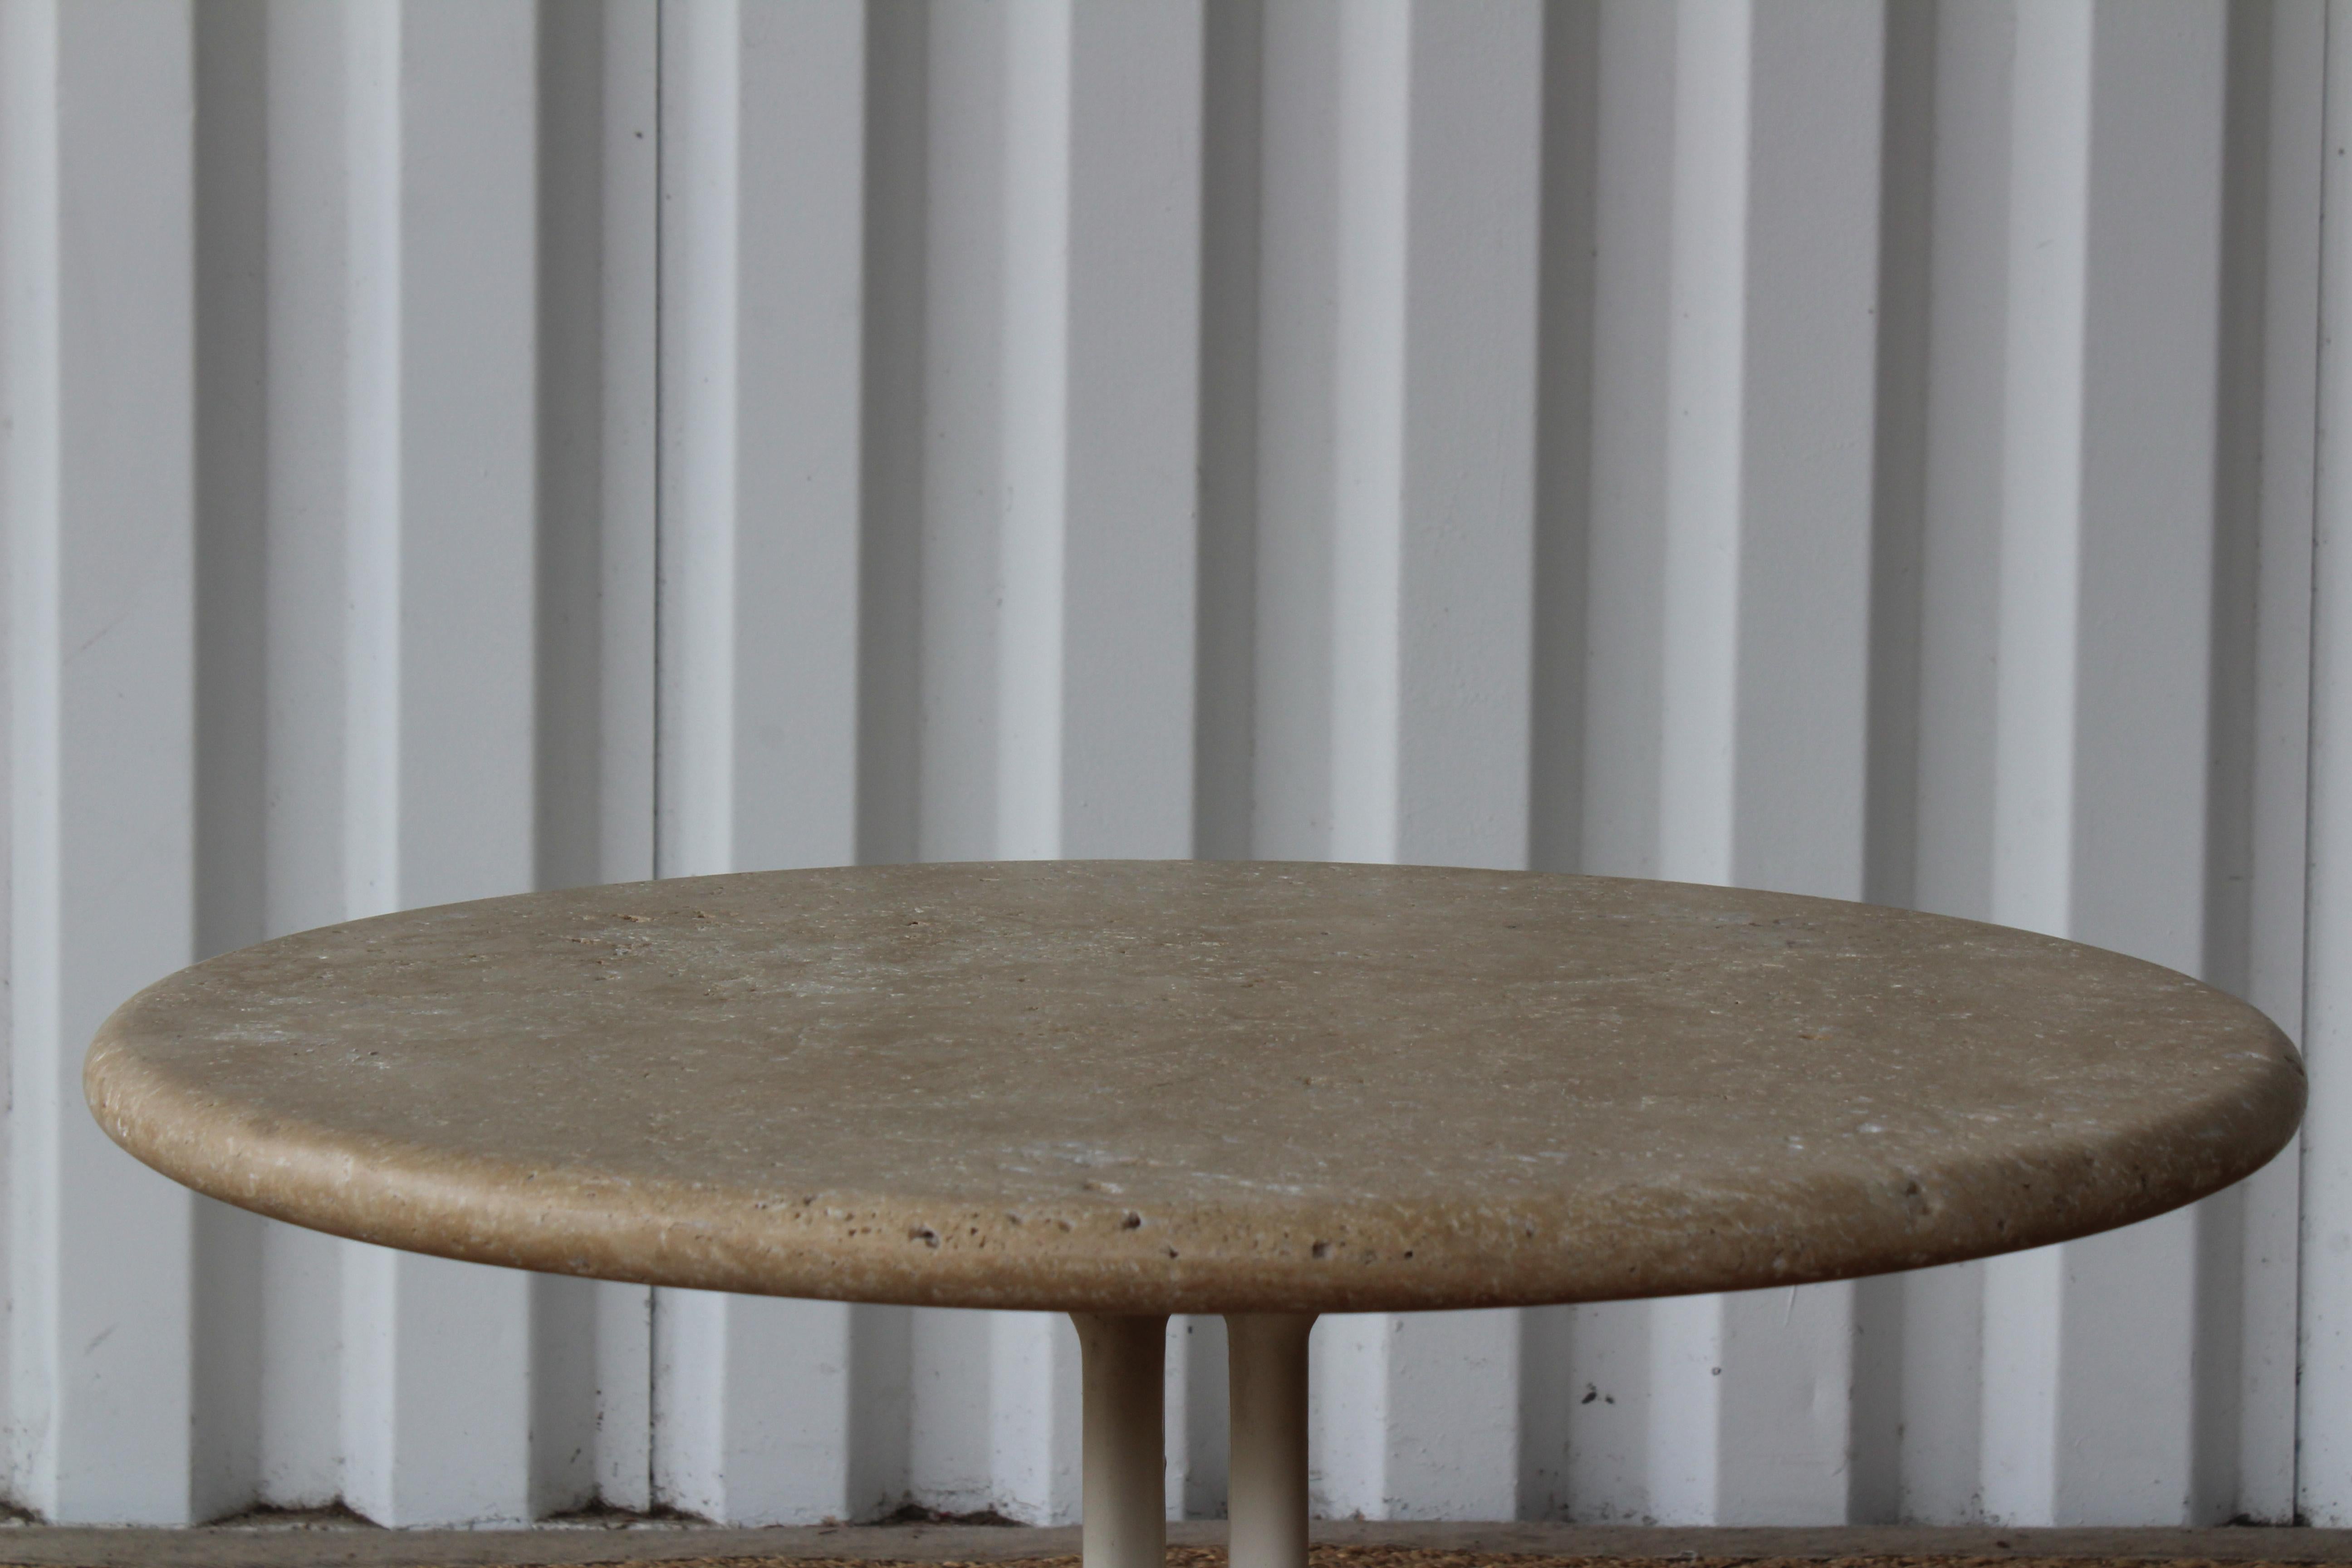 Midcentury travertine topped end table by Charles Eames for Herman Miller, 1960s. Suitable for indoor or outdoor use.